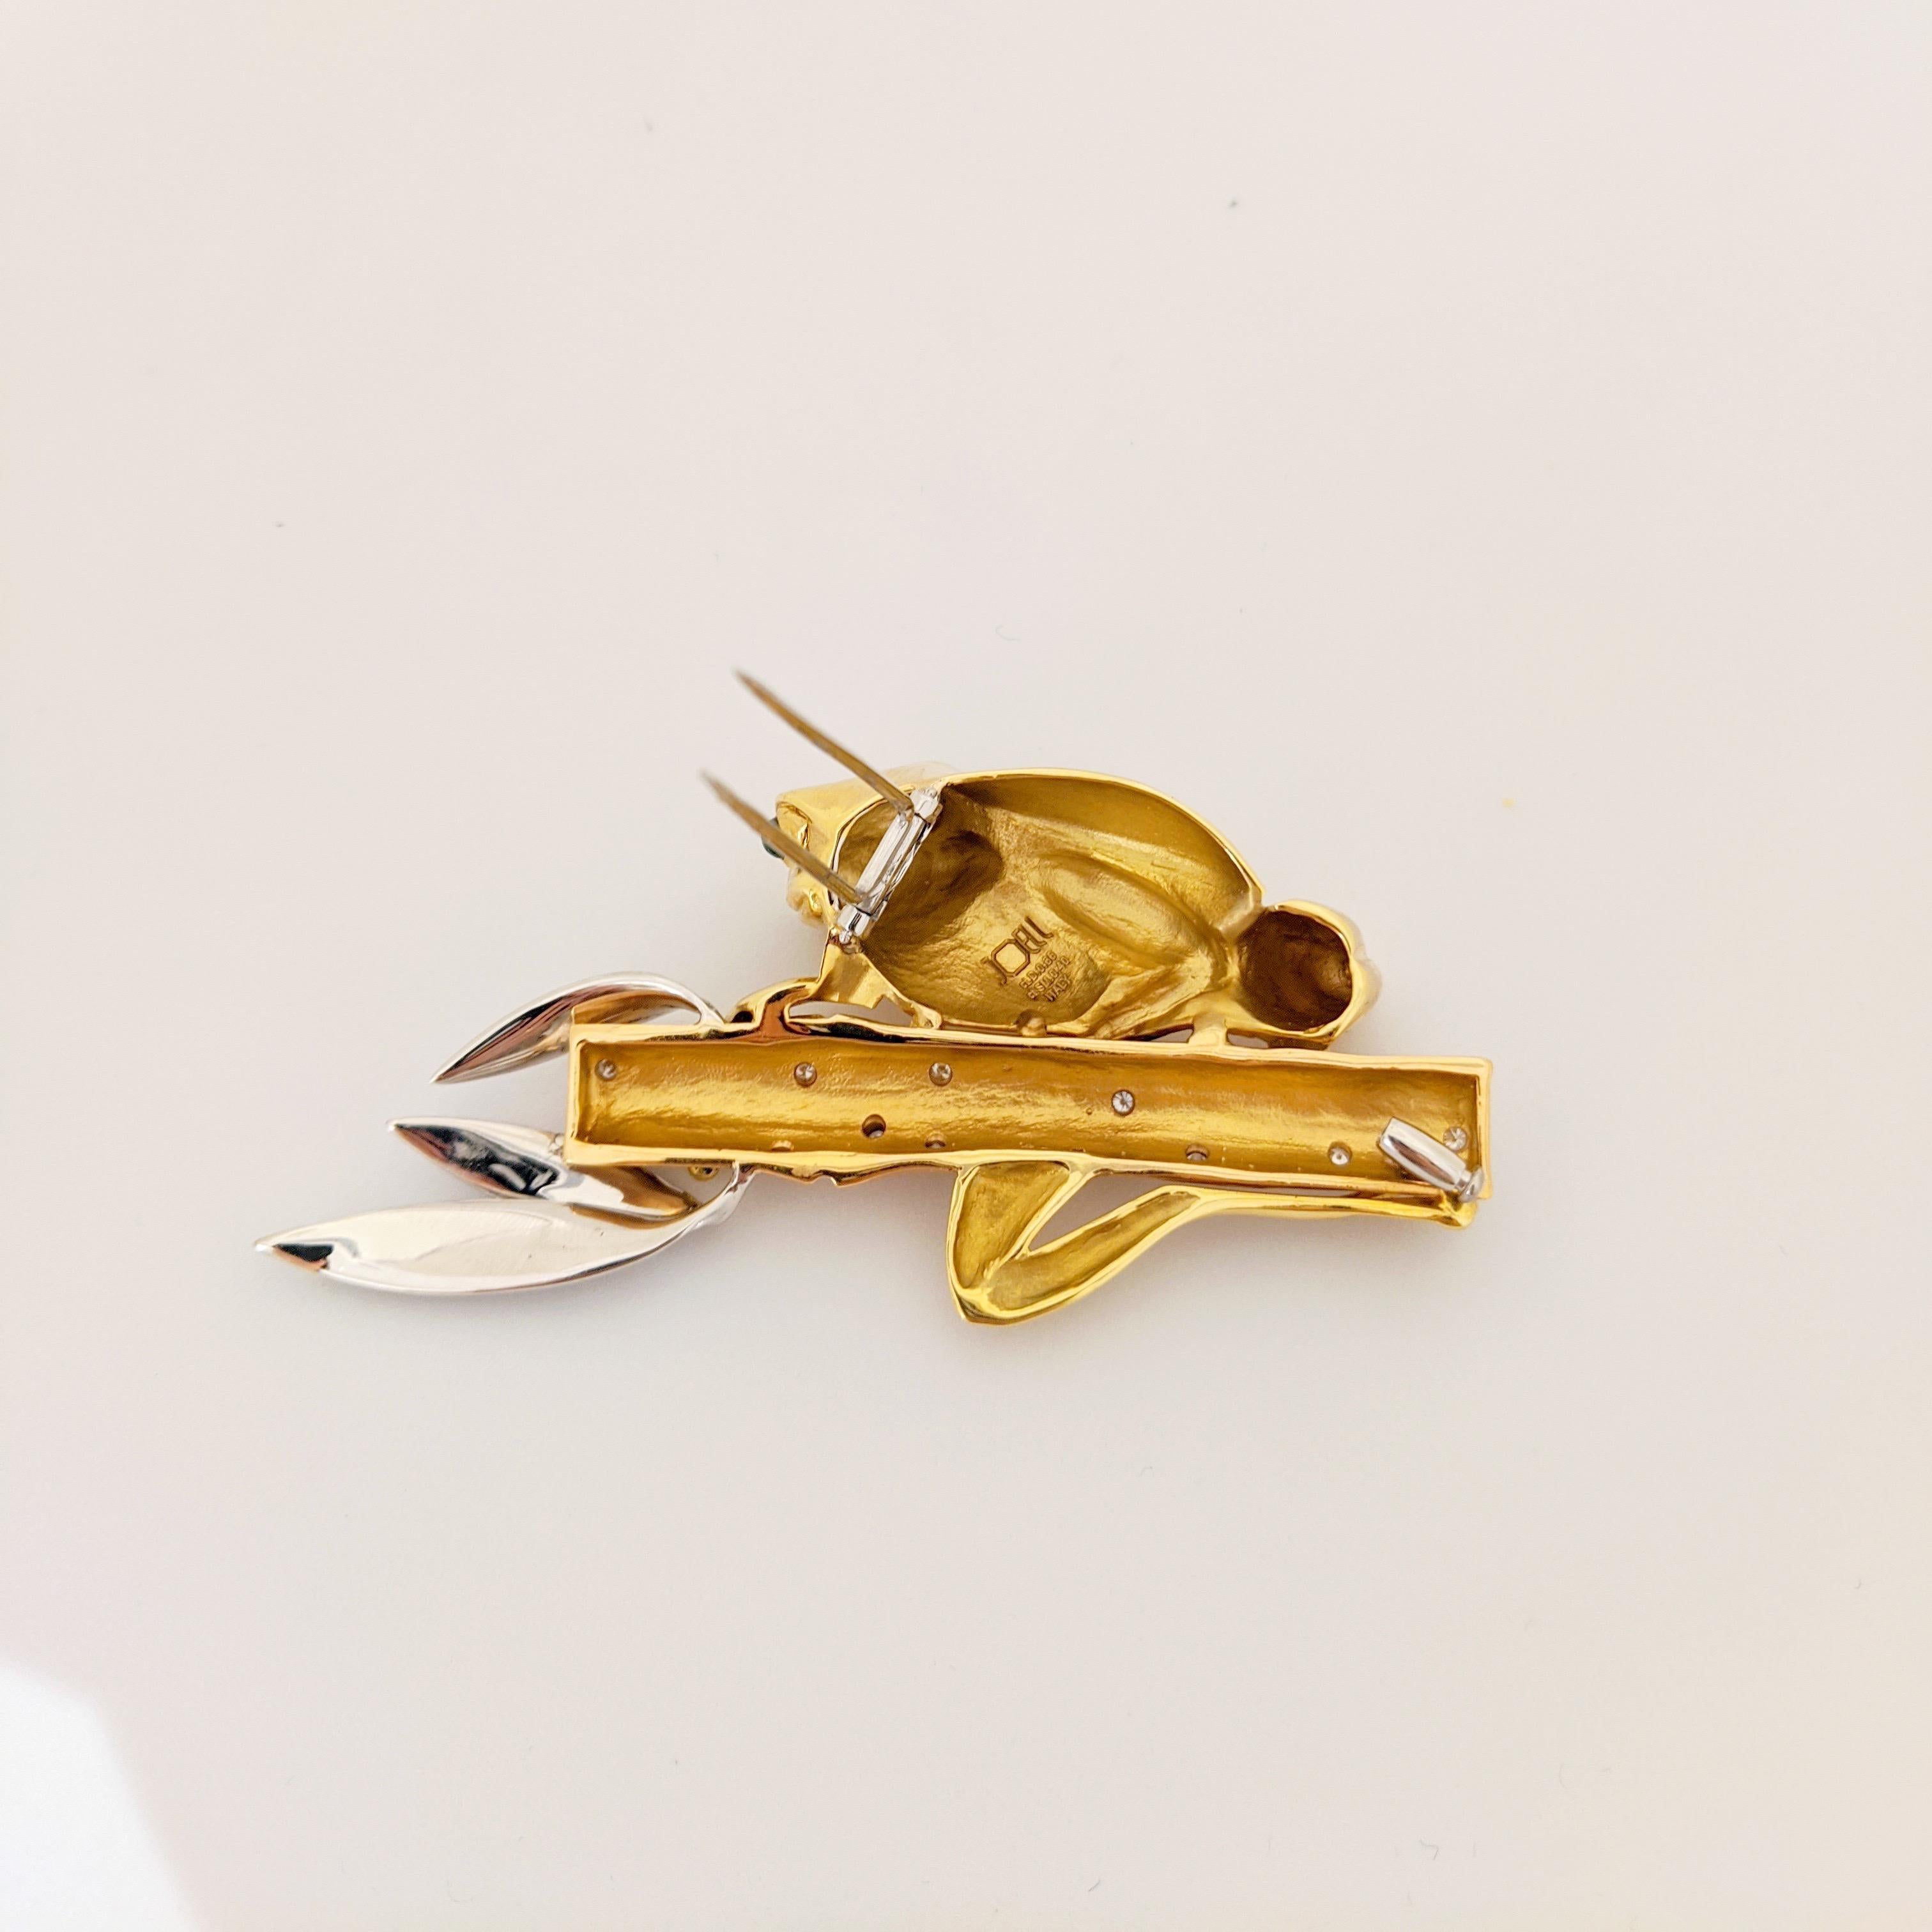 This lovely 18 karat gold brooch by Joell Prisma for Cellini Jewelers NYC, is designed with a hi-polished yellow gold frog with cabachon Emerald eyes. He is holding on to a Bamboo plant of rose gold, sprinkled with round brilliant Diamonds. The